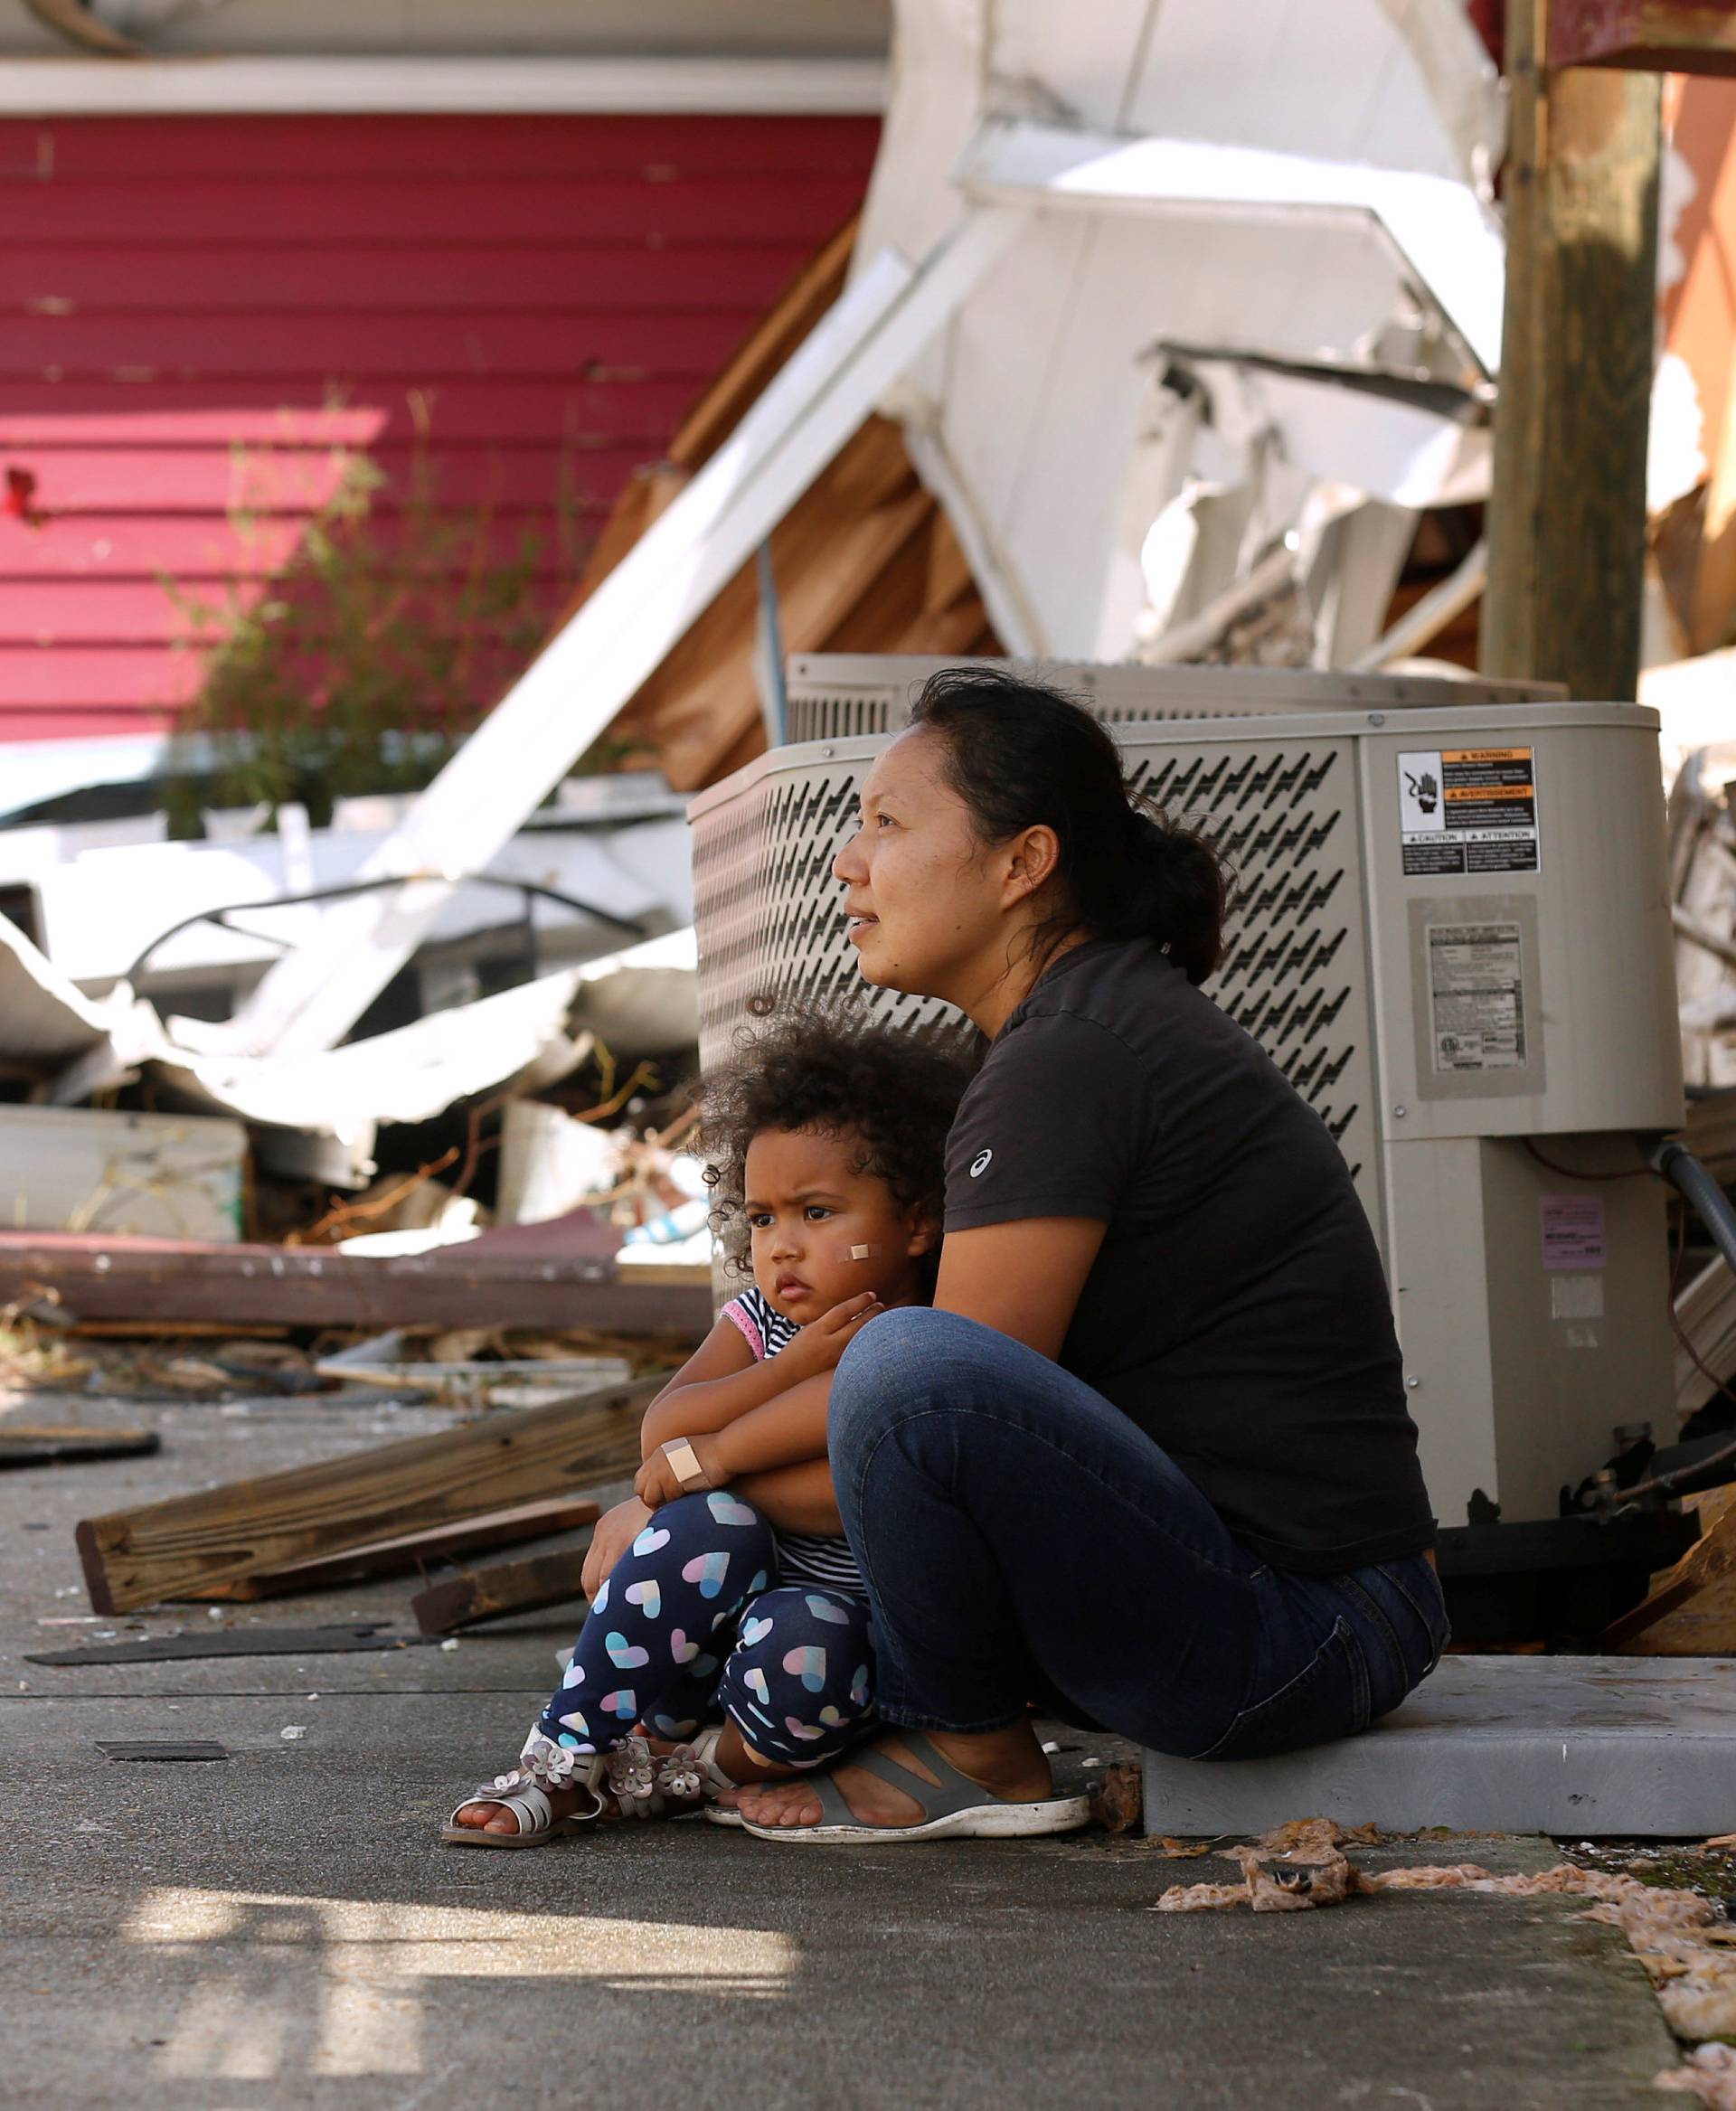 Wimlin Washington and her 3-year-old daughter Mia sit in front of their restaurant, damaged by Hurricane Michael in Callaway